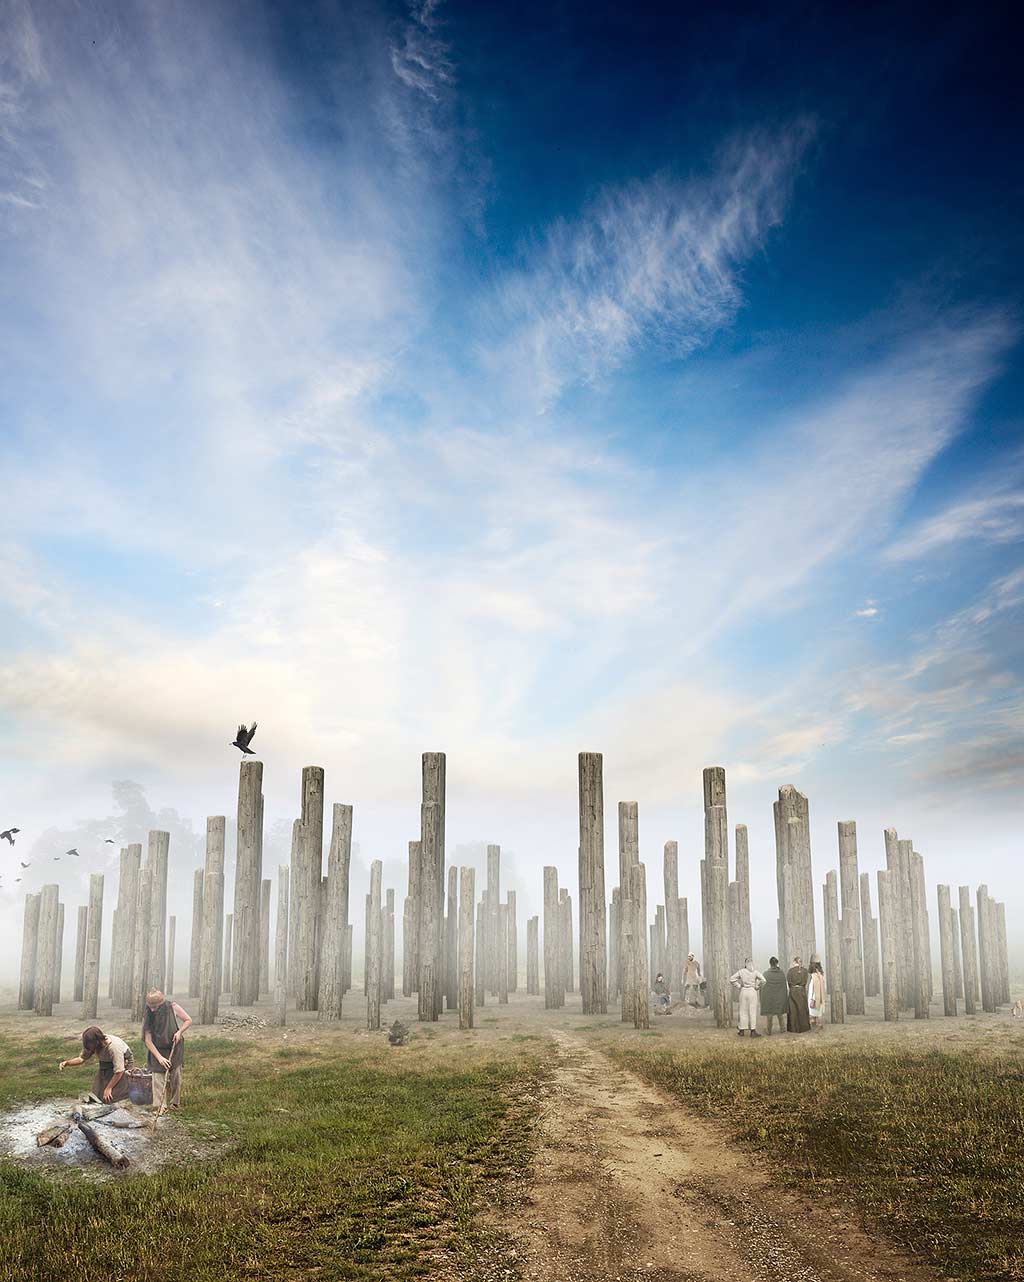 Woodhenge as it may have appeared in about 2500 BC